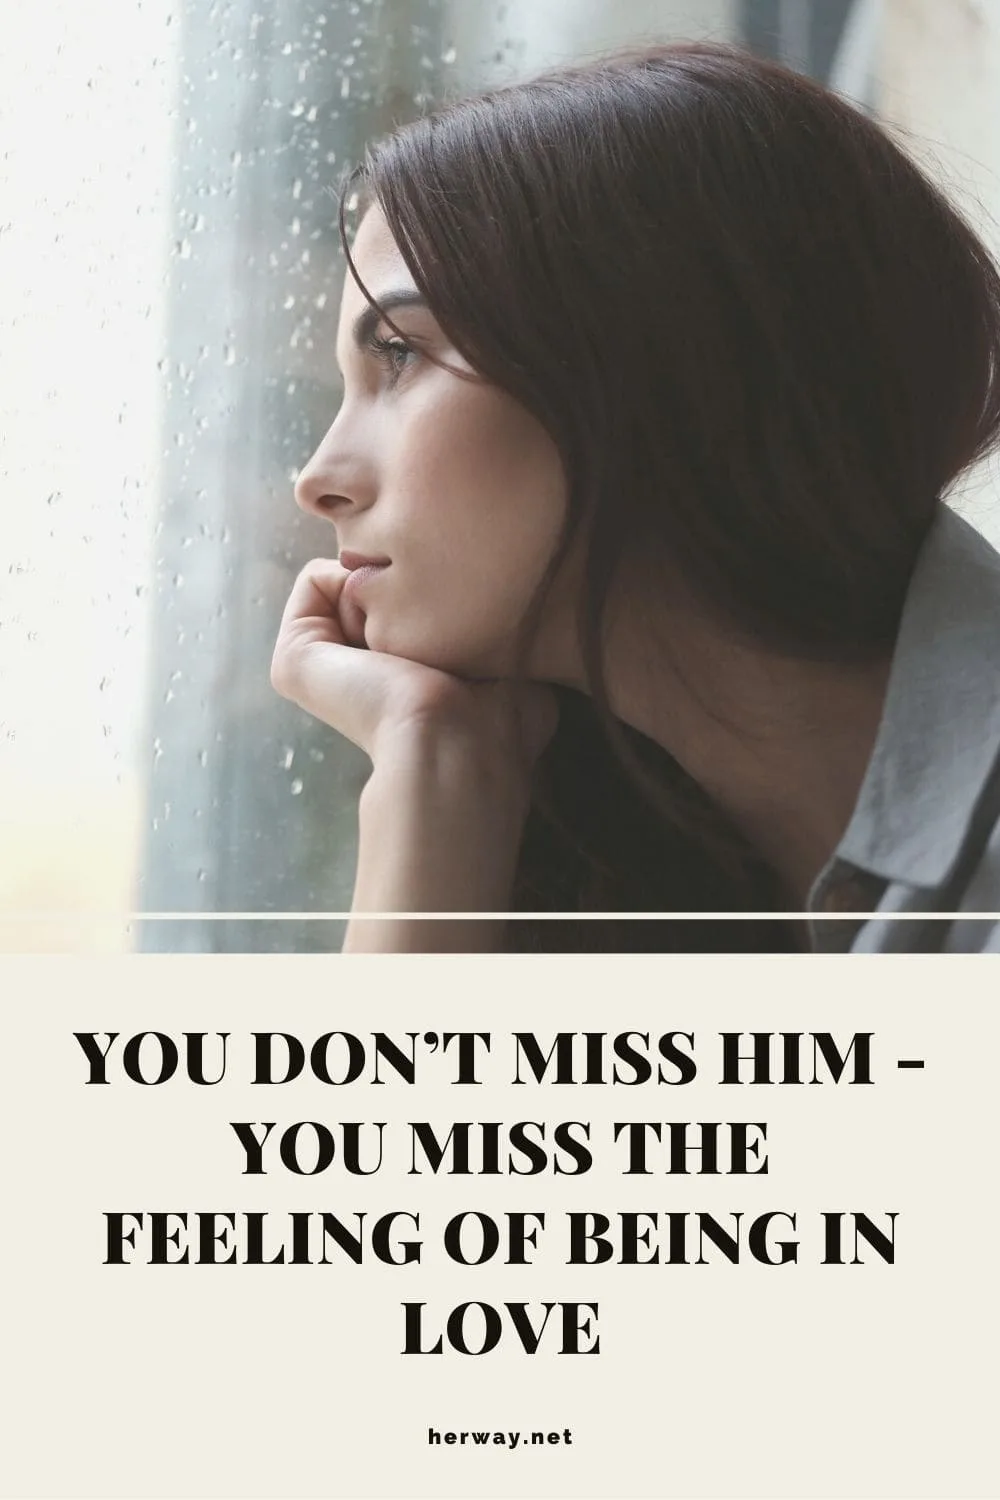 You Don’t Miss Him - You Miss The Feeling Of Being In Love